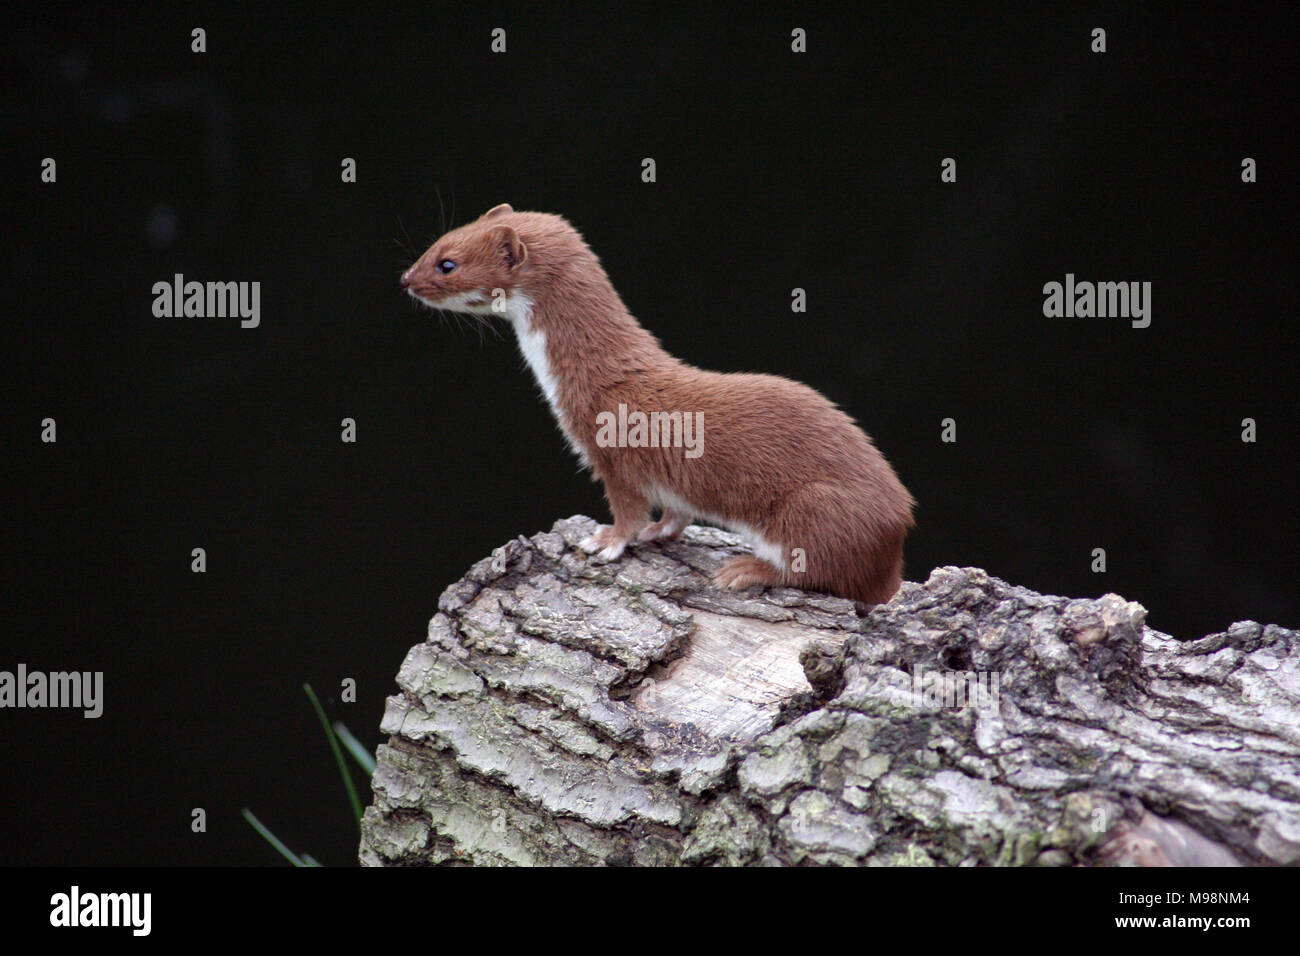 Weasels, Mustela nivalis, are related to stoats and are found across the UK, Europe& Asia. A ferocious hunter it is known folklore from England to Jap Stock Photo